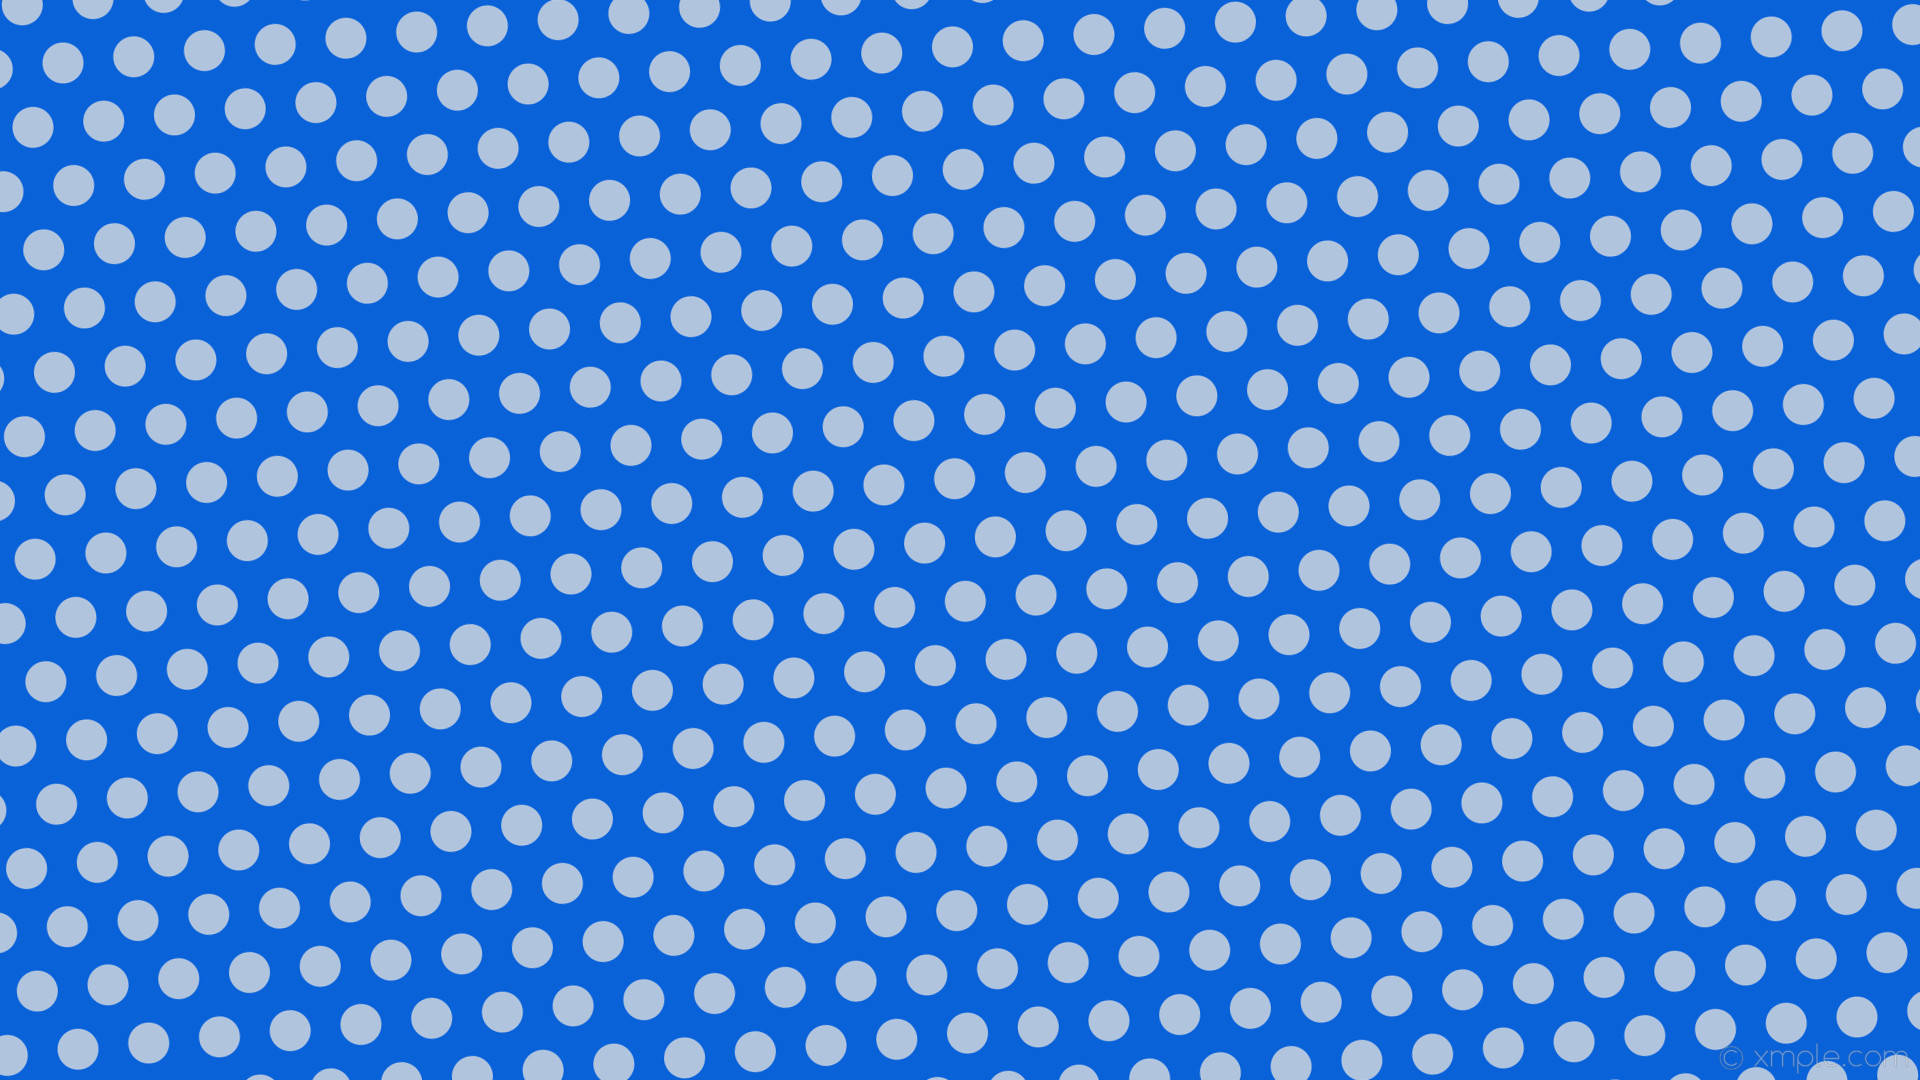 Azure Blue With Gray Polka Dots Background